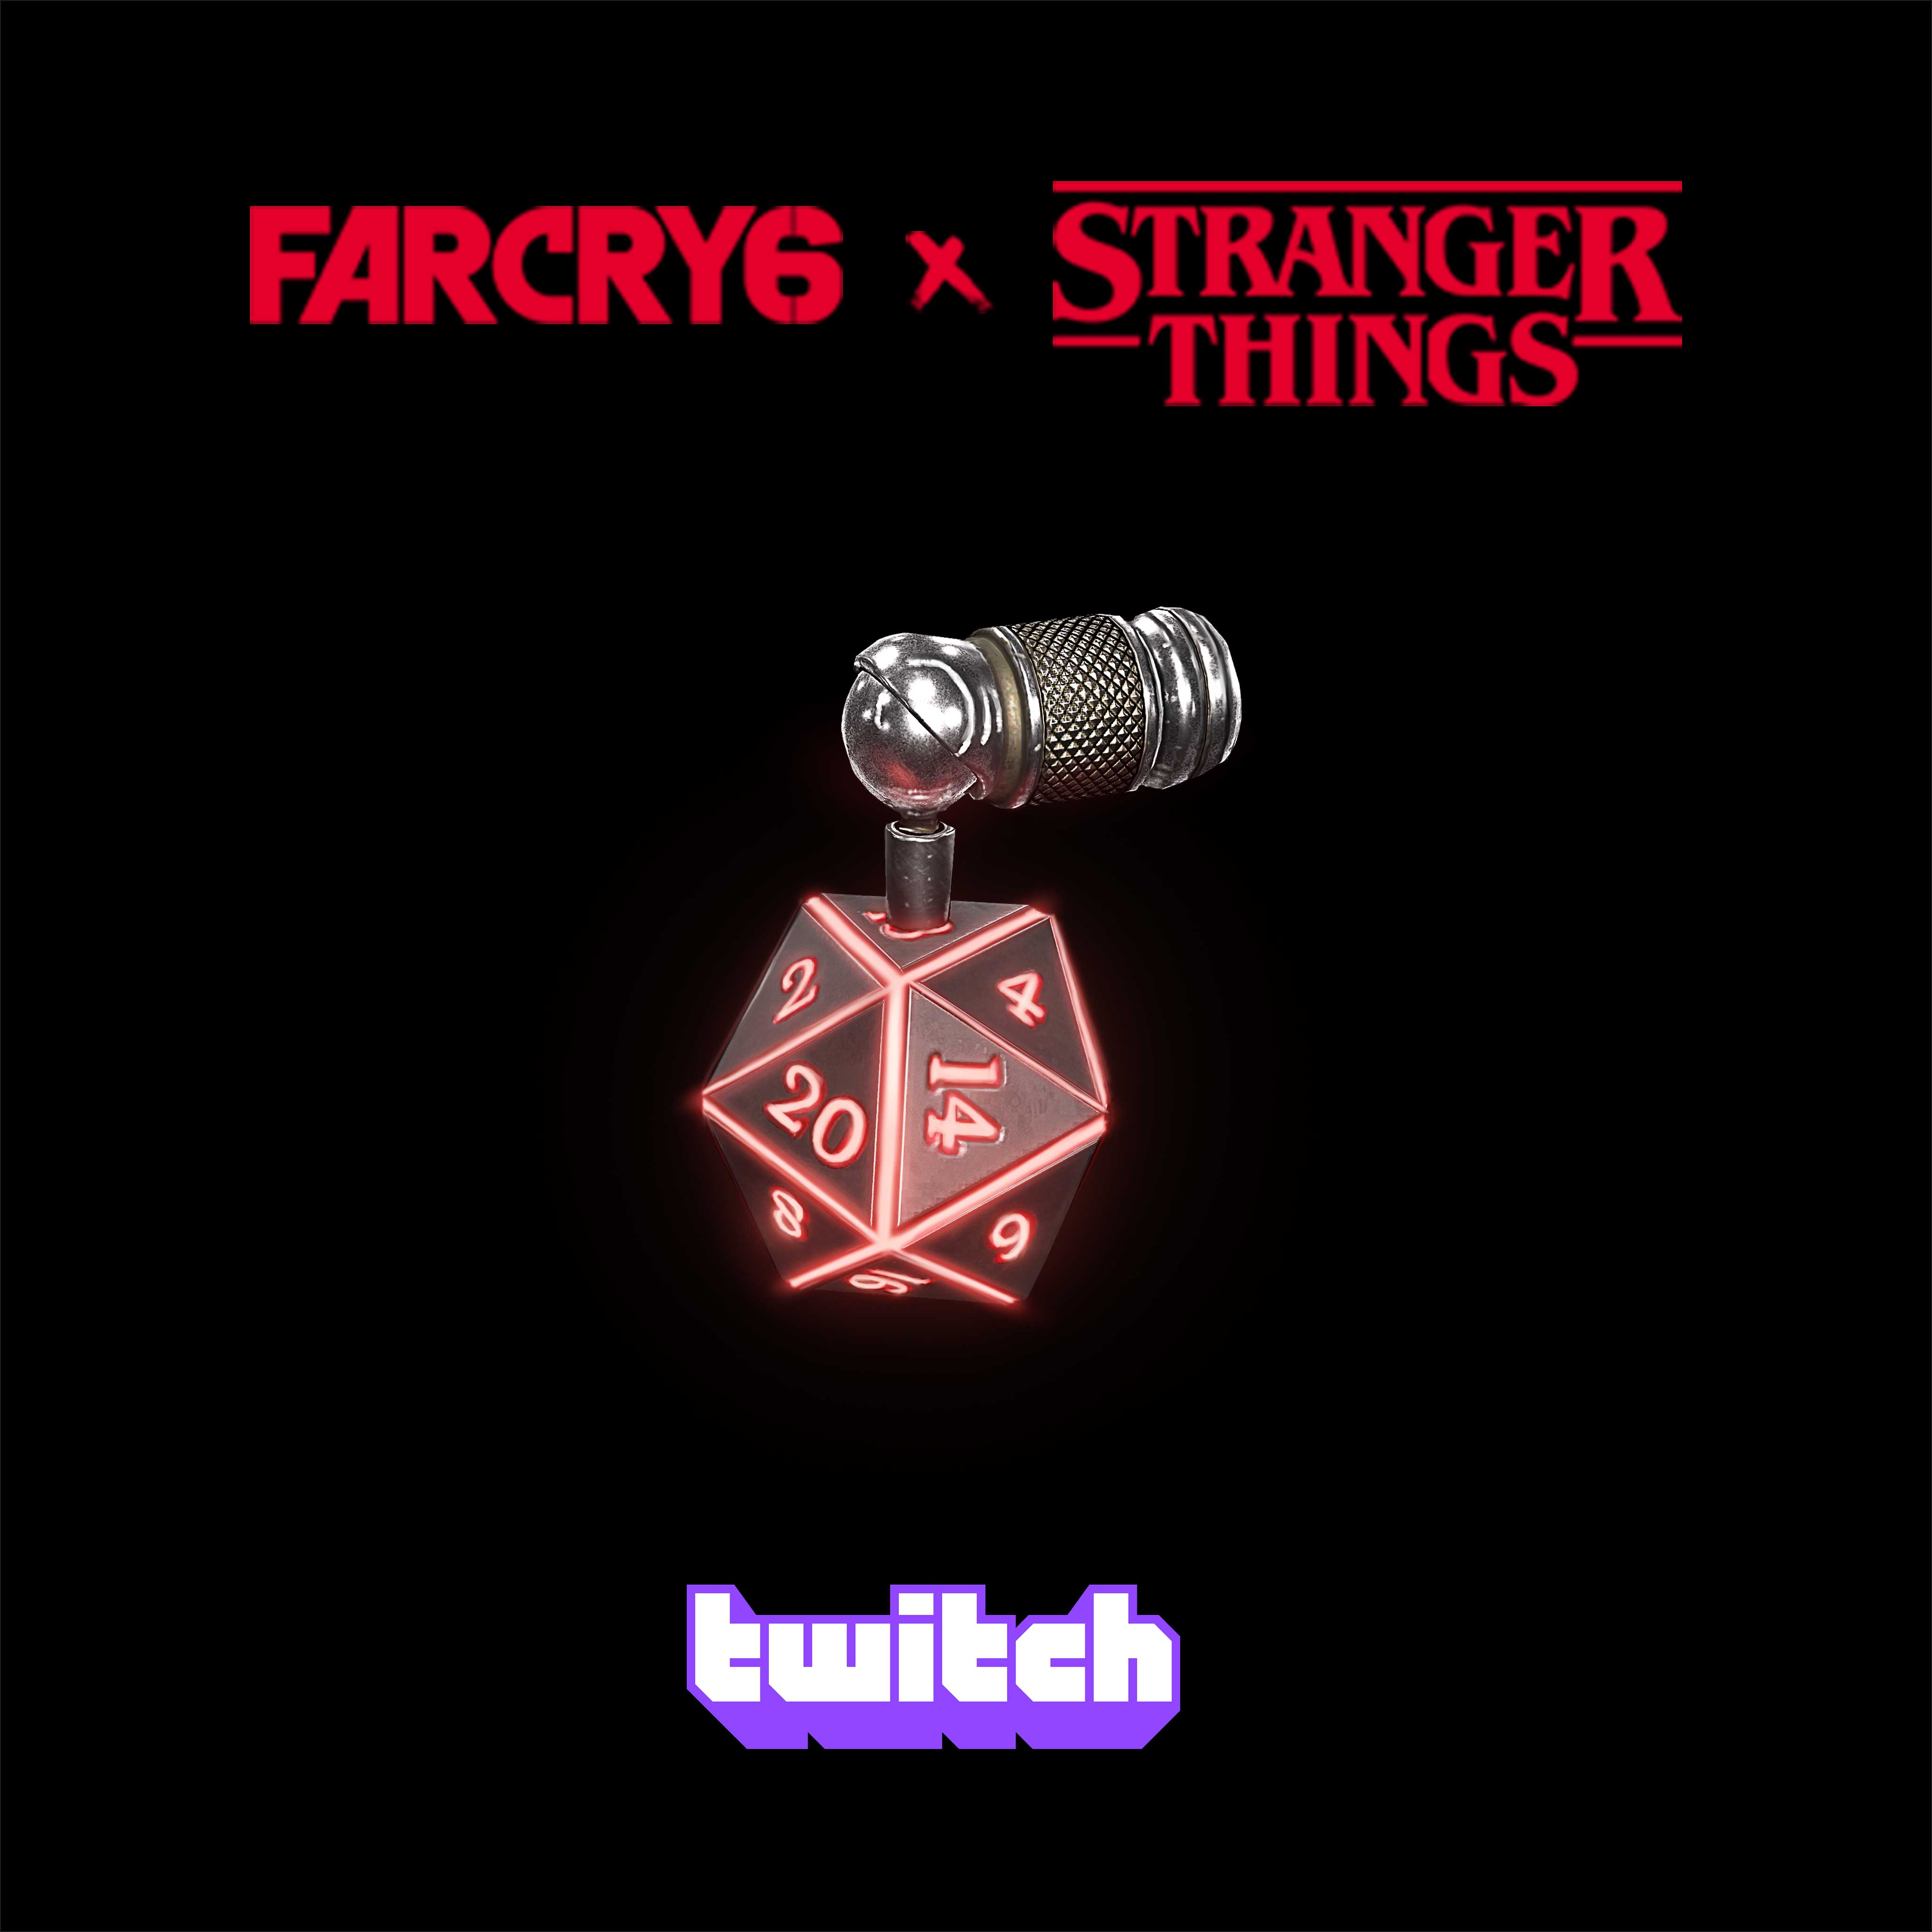 Far Cry on X: To celebrate the launch of the free Stranger Things  crossover mission tomorrow, we'll have a Twitch drop for a Stranger Things  charm, starting tomorrow until March 27th! Watch